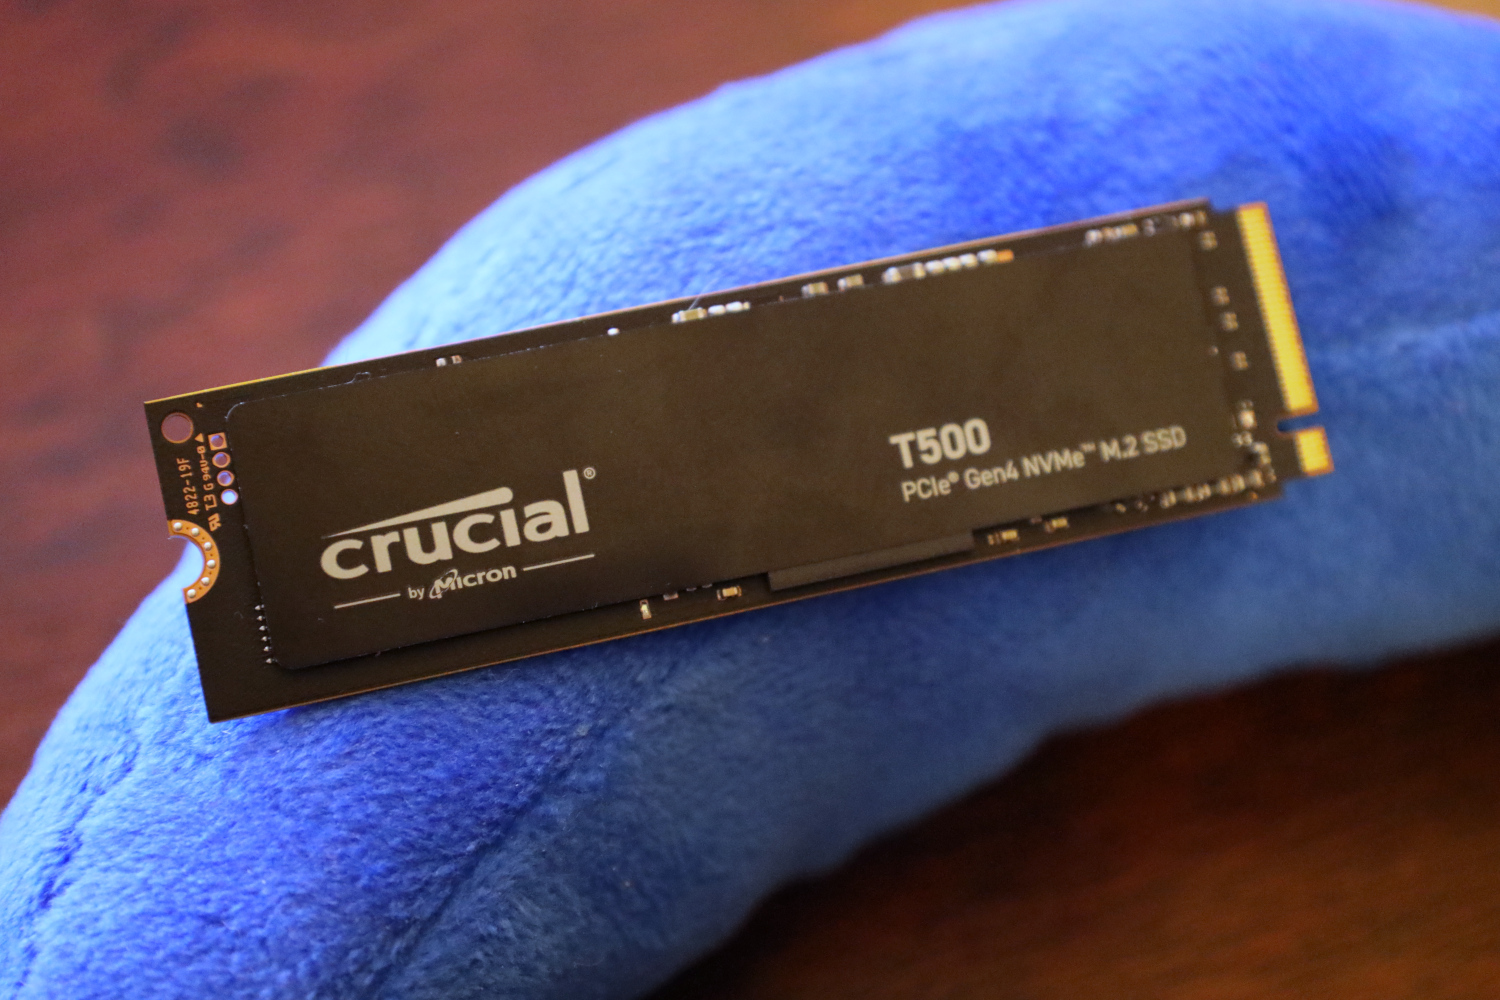 Crucial Launches New T500 Gen 4 NVMe SSD